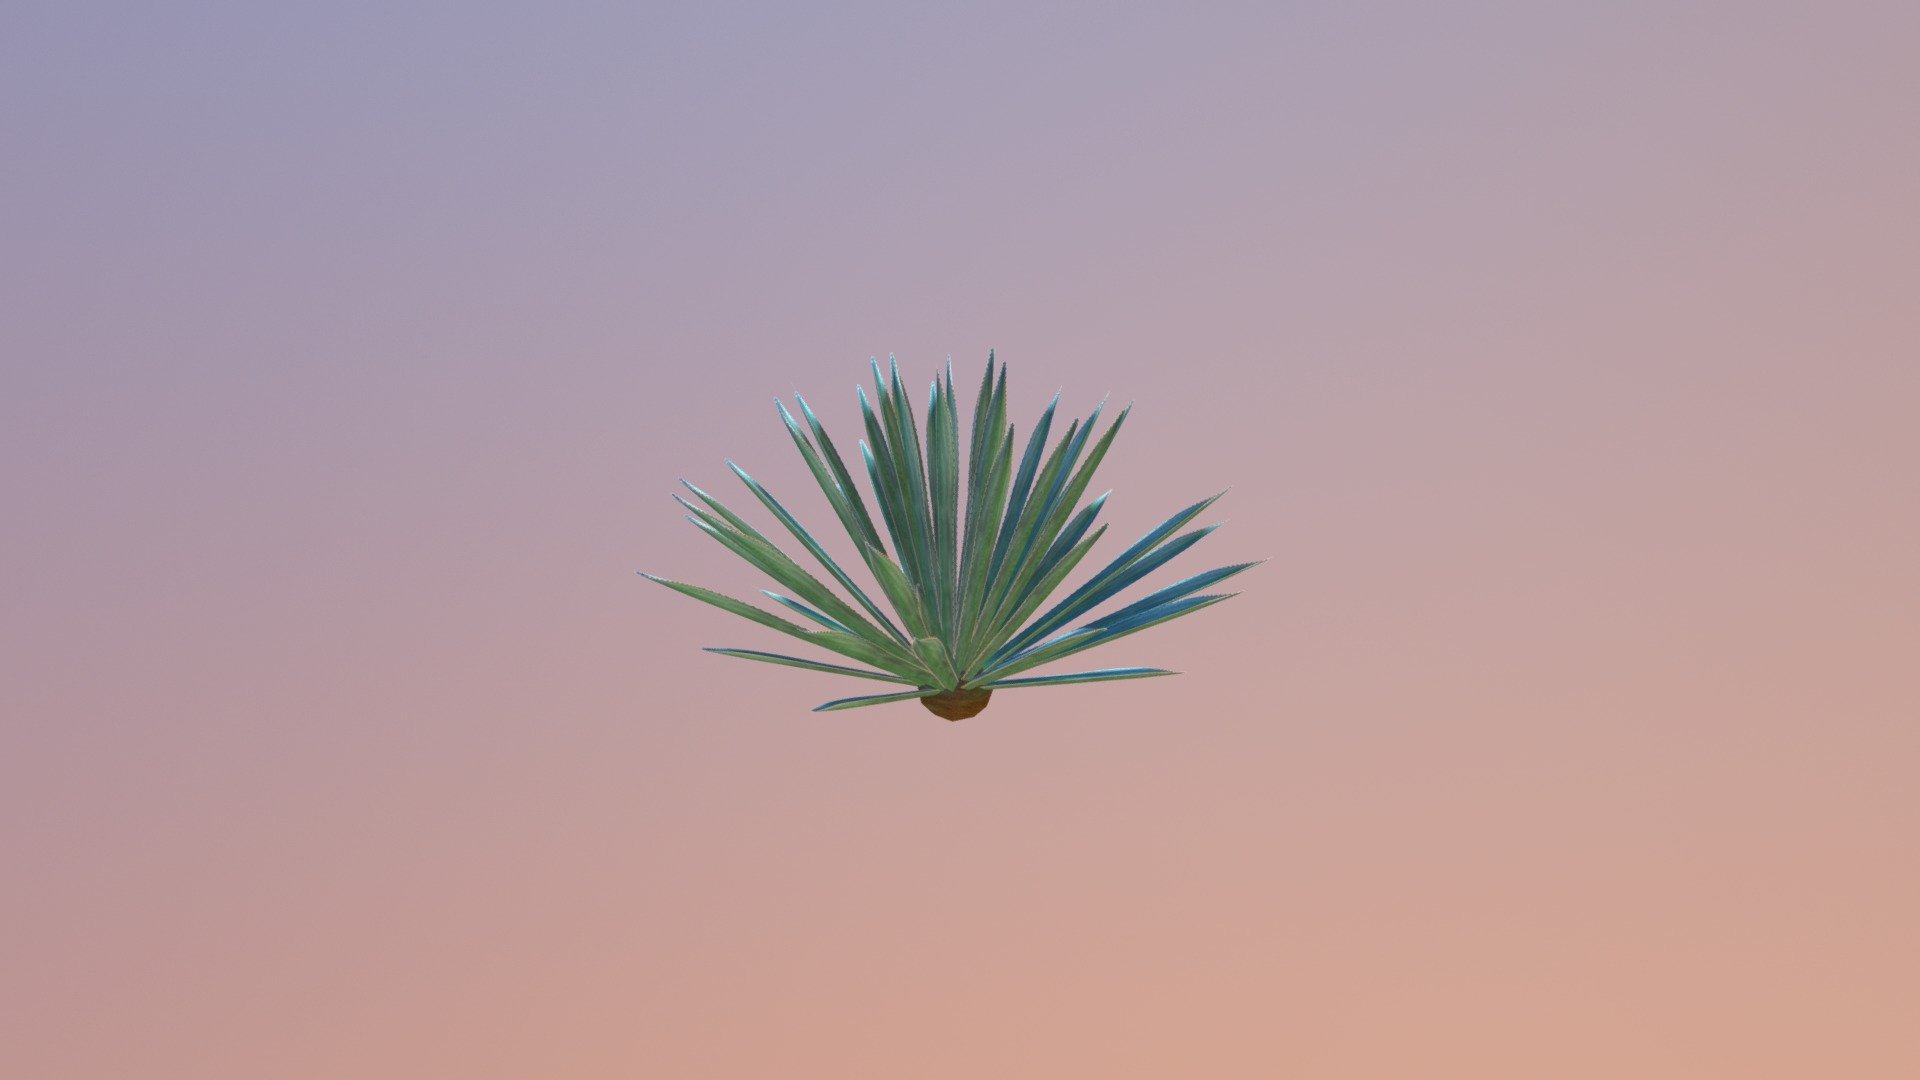 Agave Azul is the main plant used to make Tequila.  I made this using 3ds Max.  Textures were made using GIMP, reconstructed from real photos.  The foliage uses alpha mapping.  This object will be available in my upcoming Arma 3 terrain 3d model